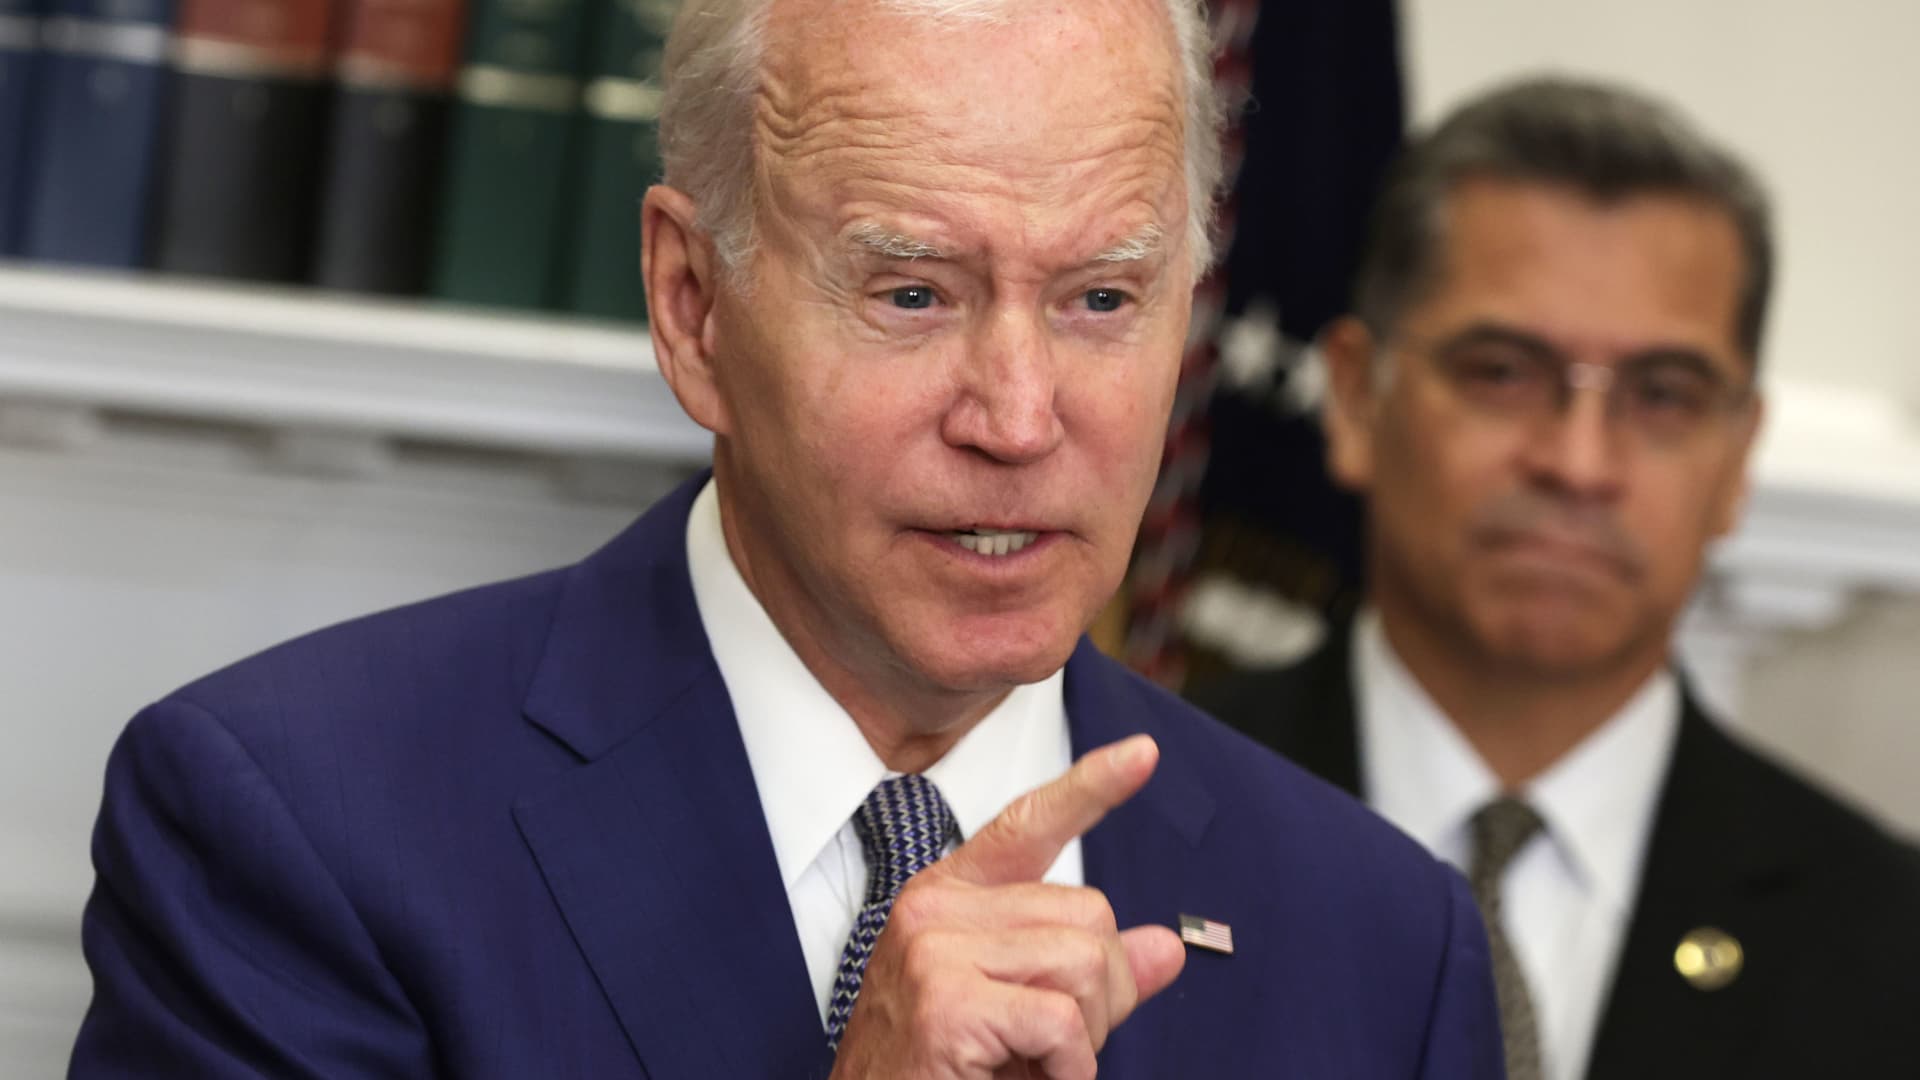 Biden could declare a public health emergency to expand abortion access, but it would face a tremendous legal fight